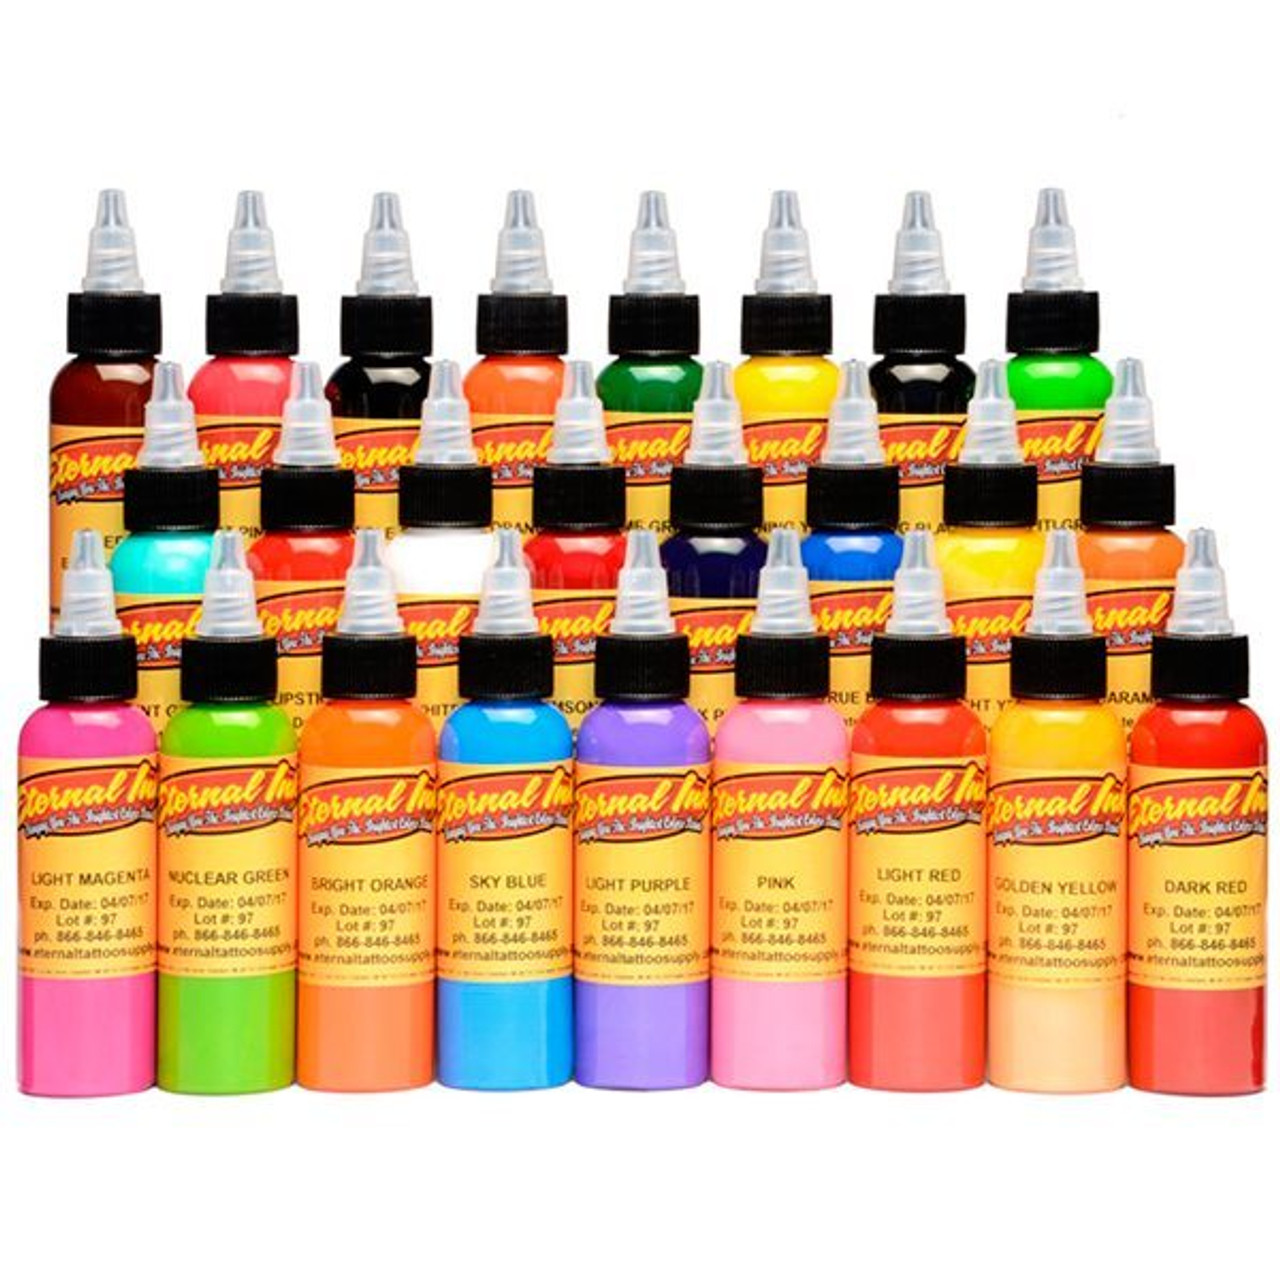 Eternal Tattoo Ink Professional 6 Color 1 Ounce PASTEL SET HOT Free  Shipping | eBay